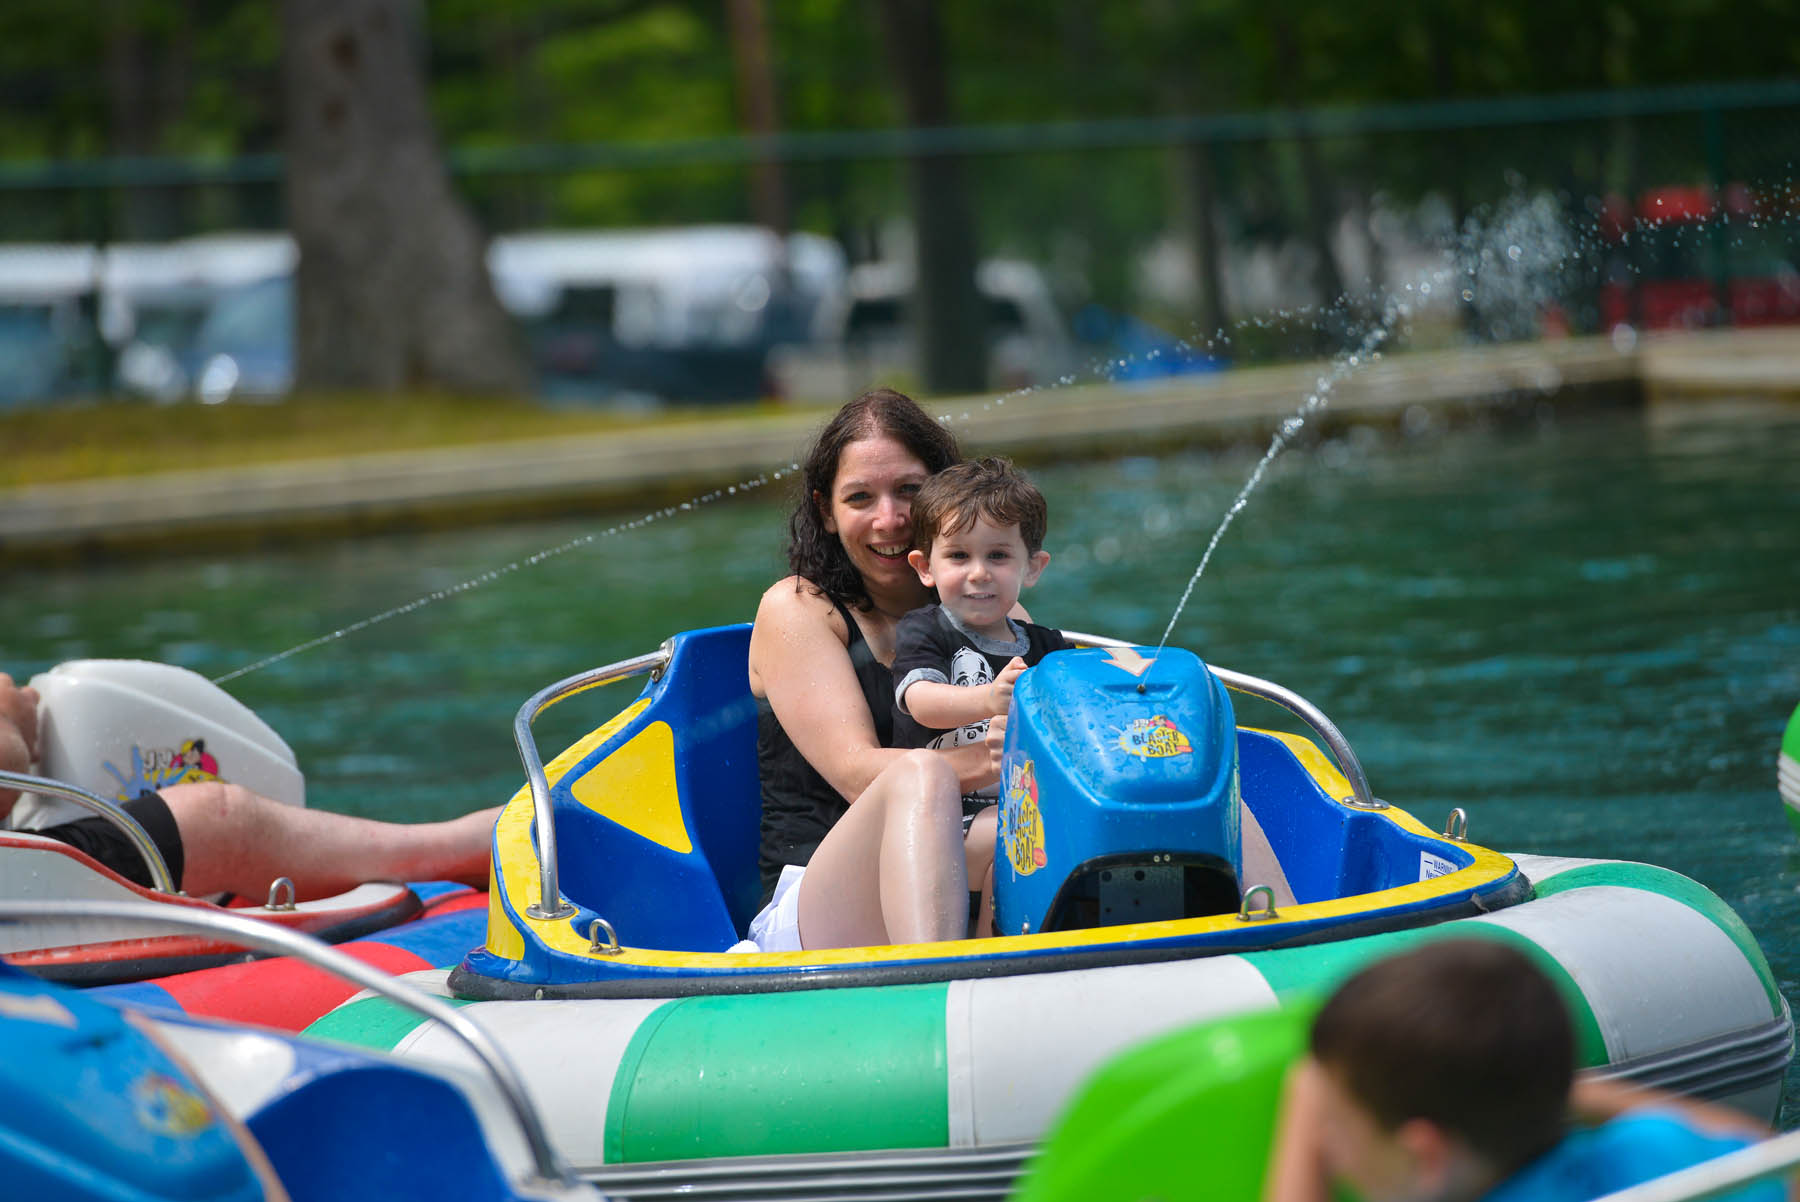 Mother and son in bumper boat spraying water.